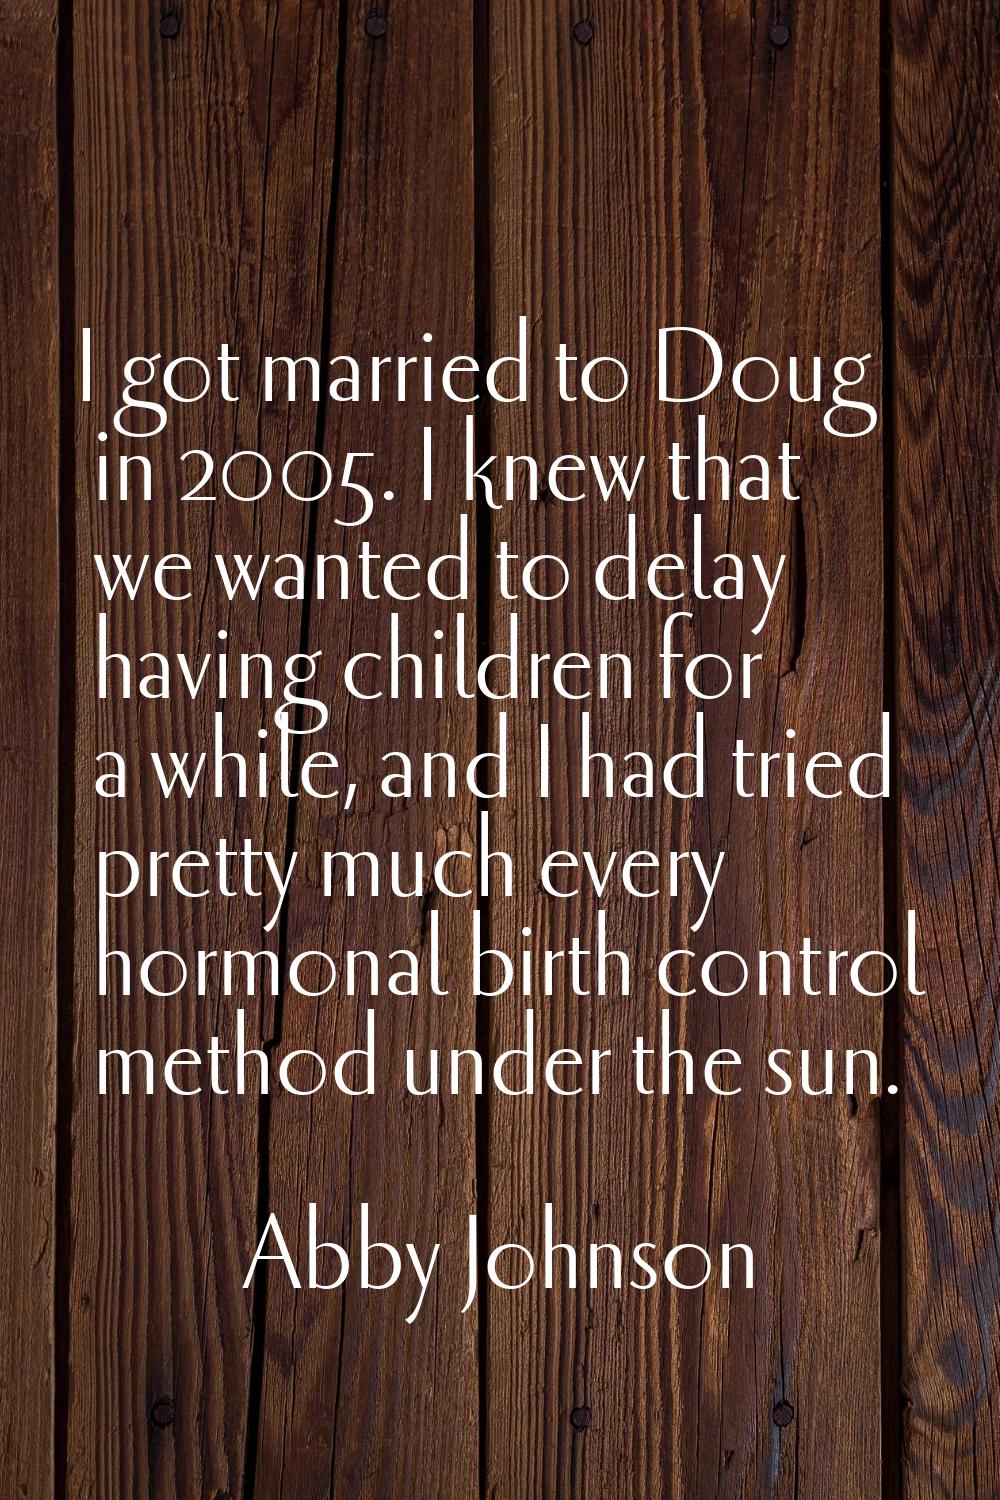 I got married to Doug in 2005. I knew that we wanted to delay having children for a while, and I ha